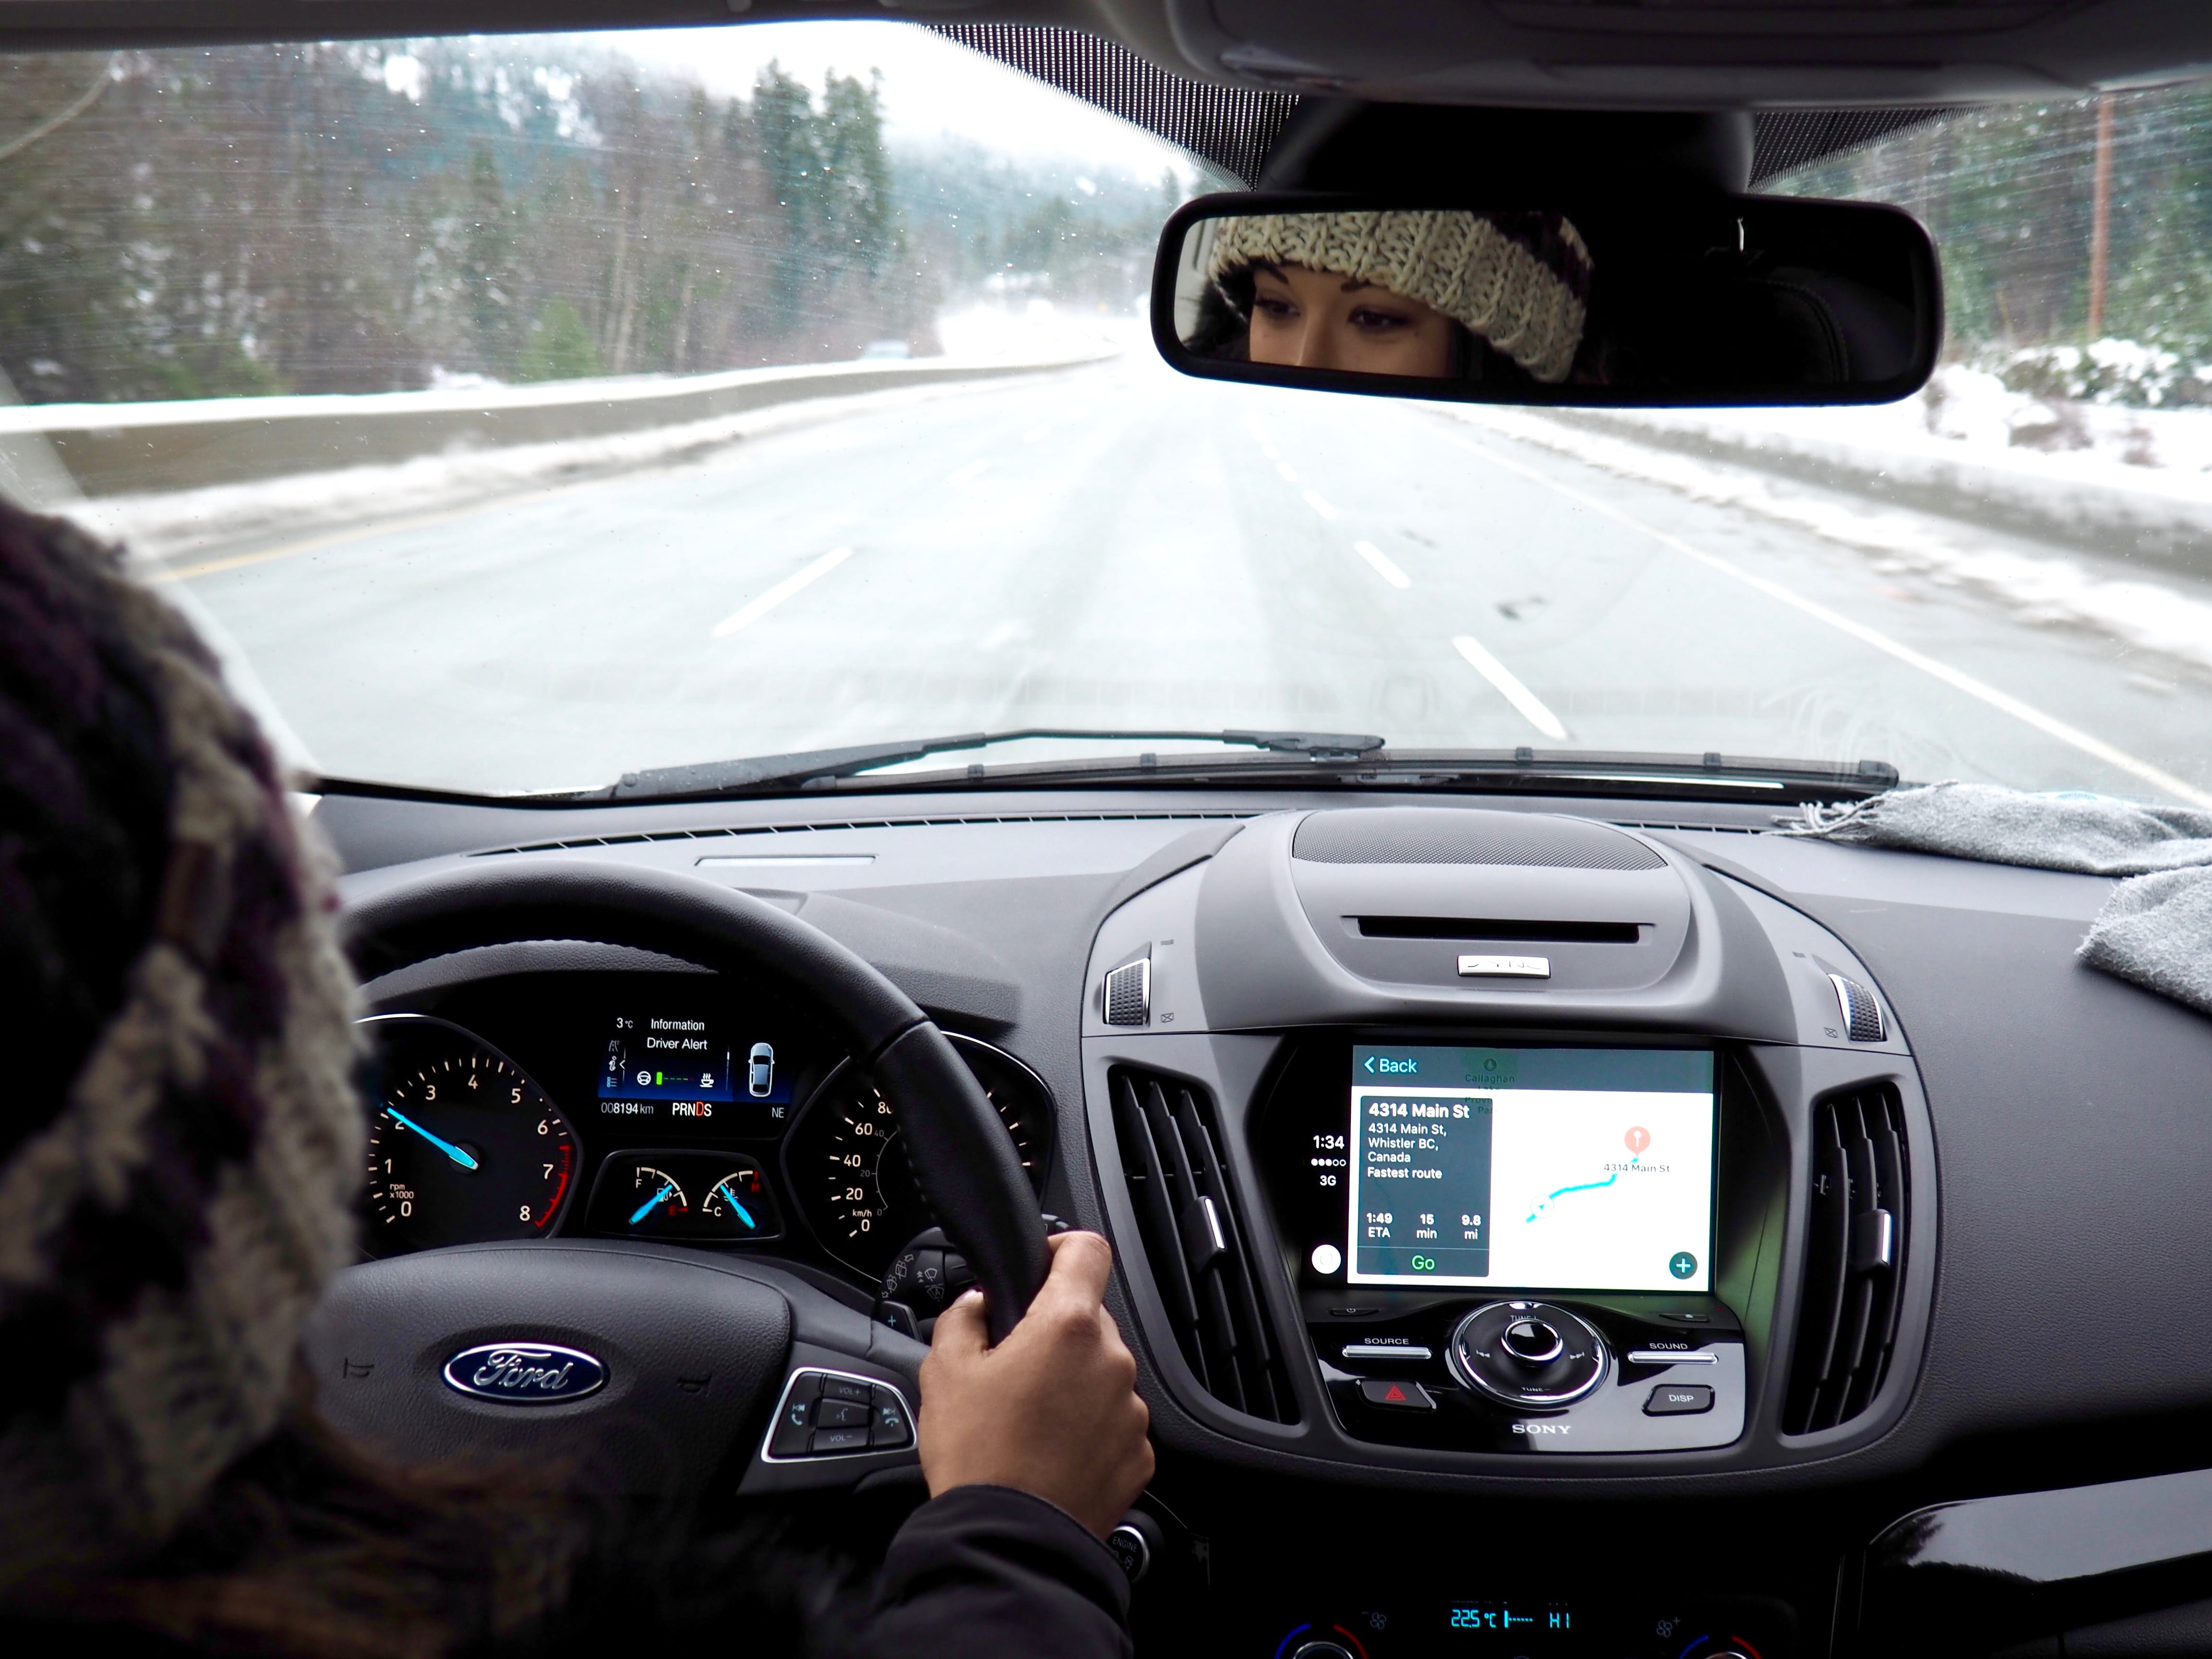 Escaping To Whistler With Ford Canada